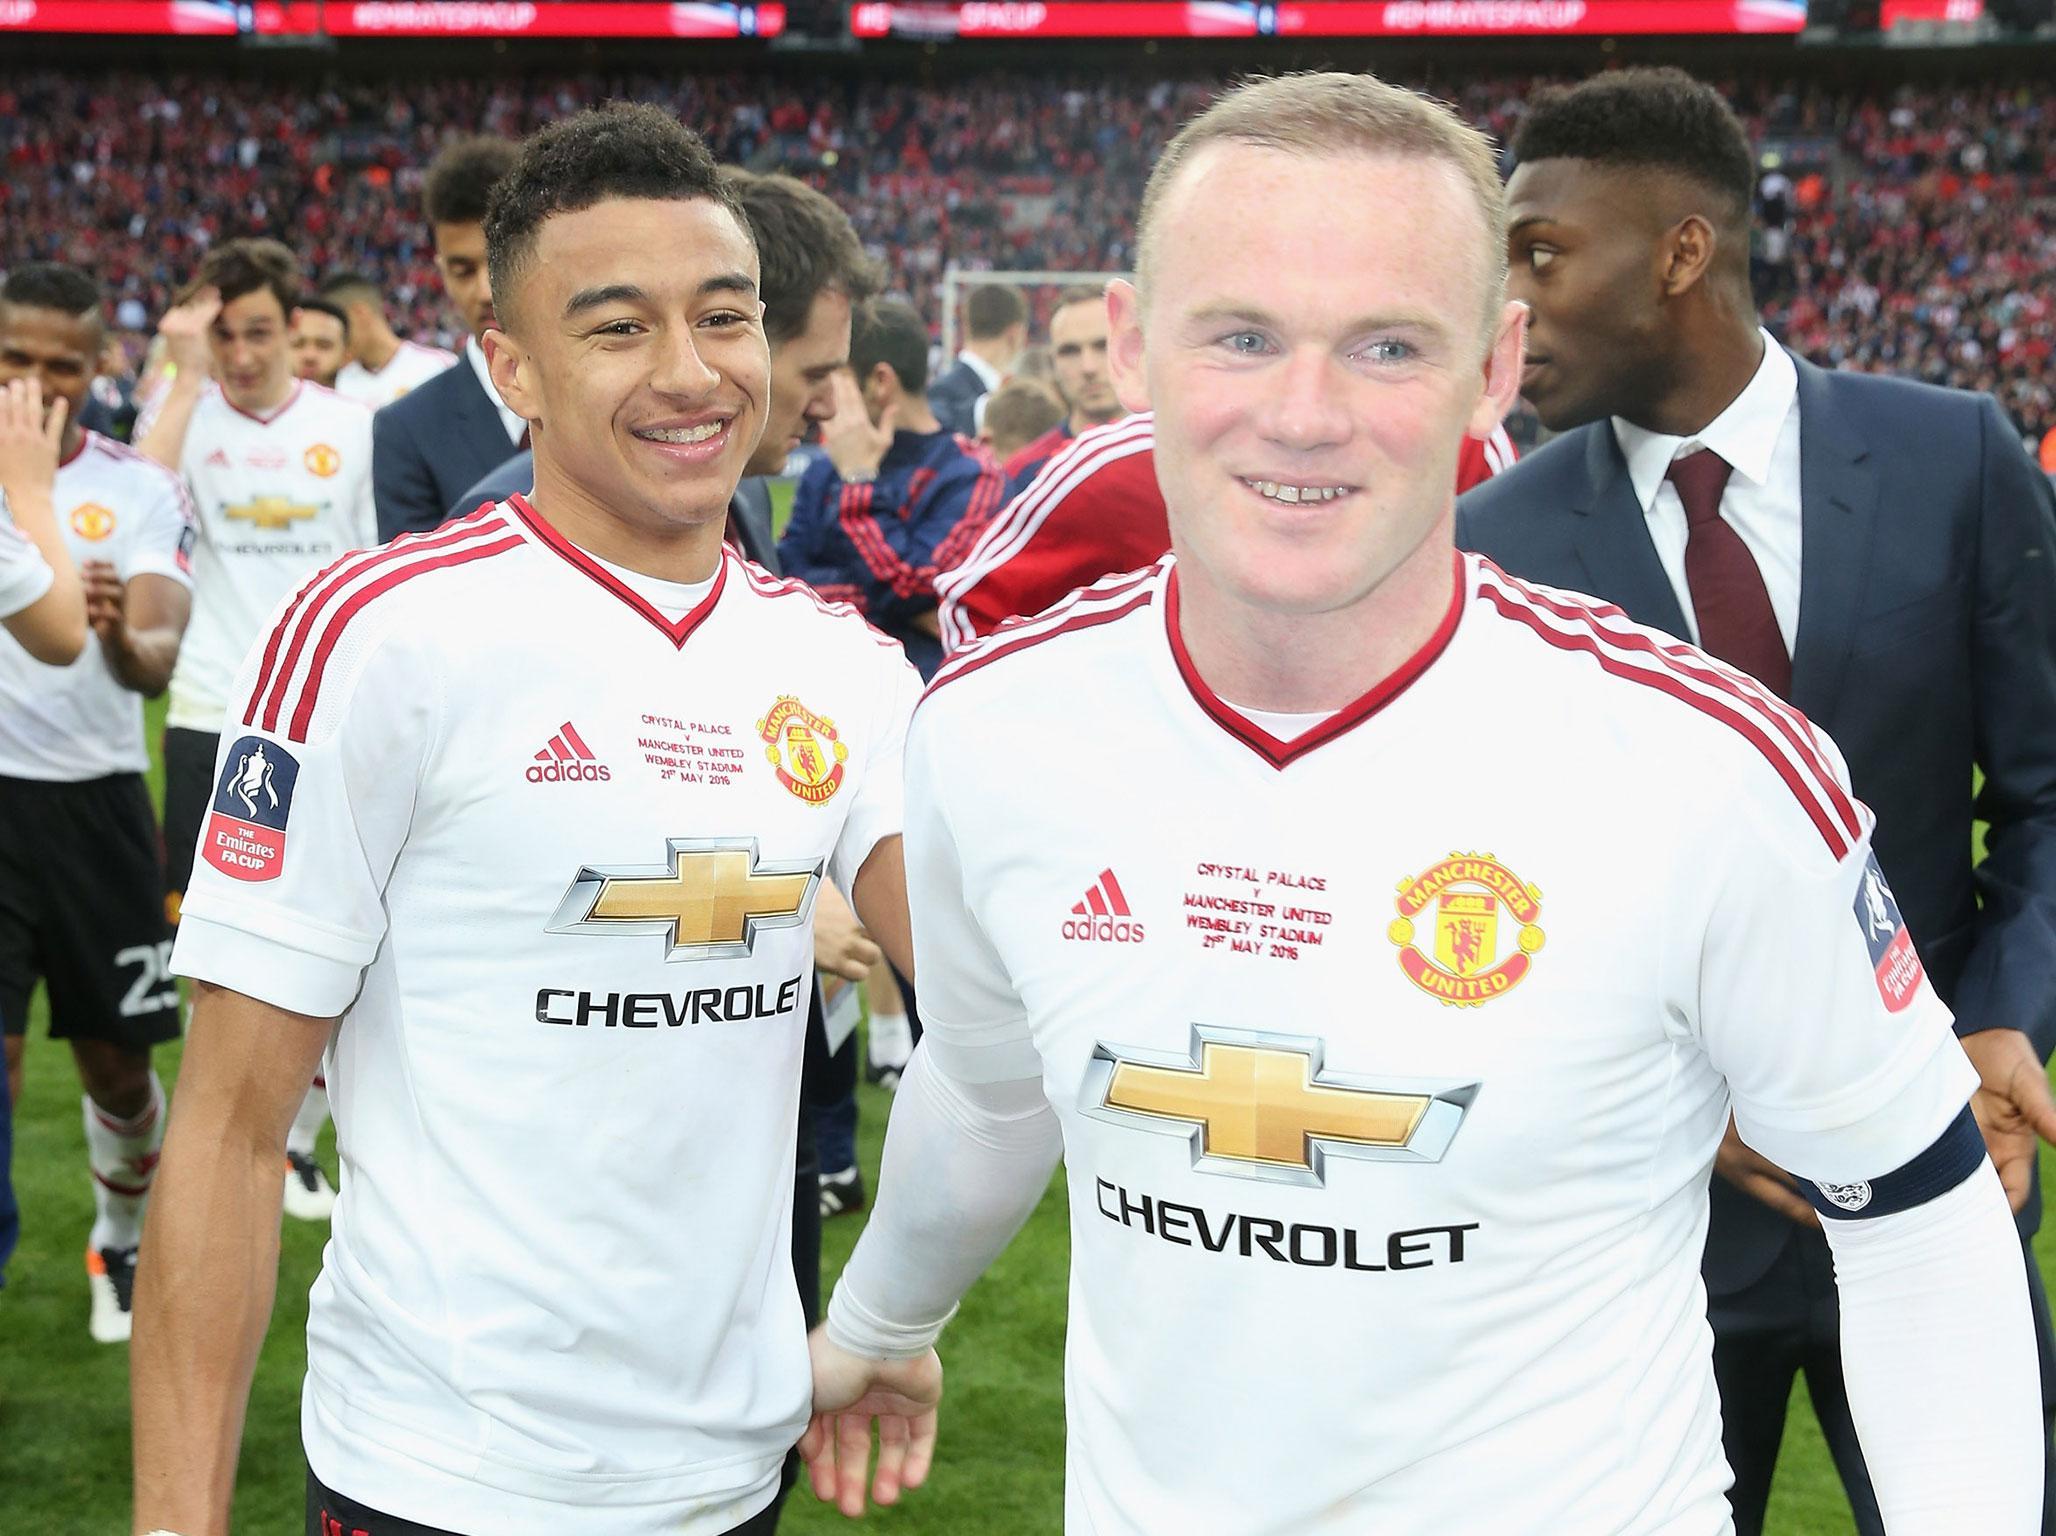 Jesse Lingard enjoyed his time with Wayne Rooney at Manchester United